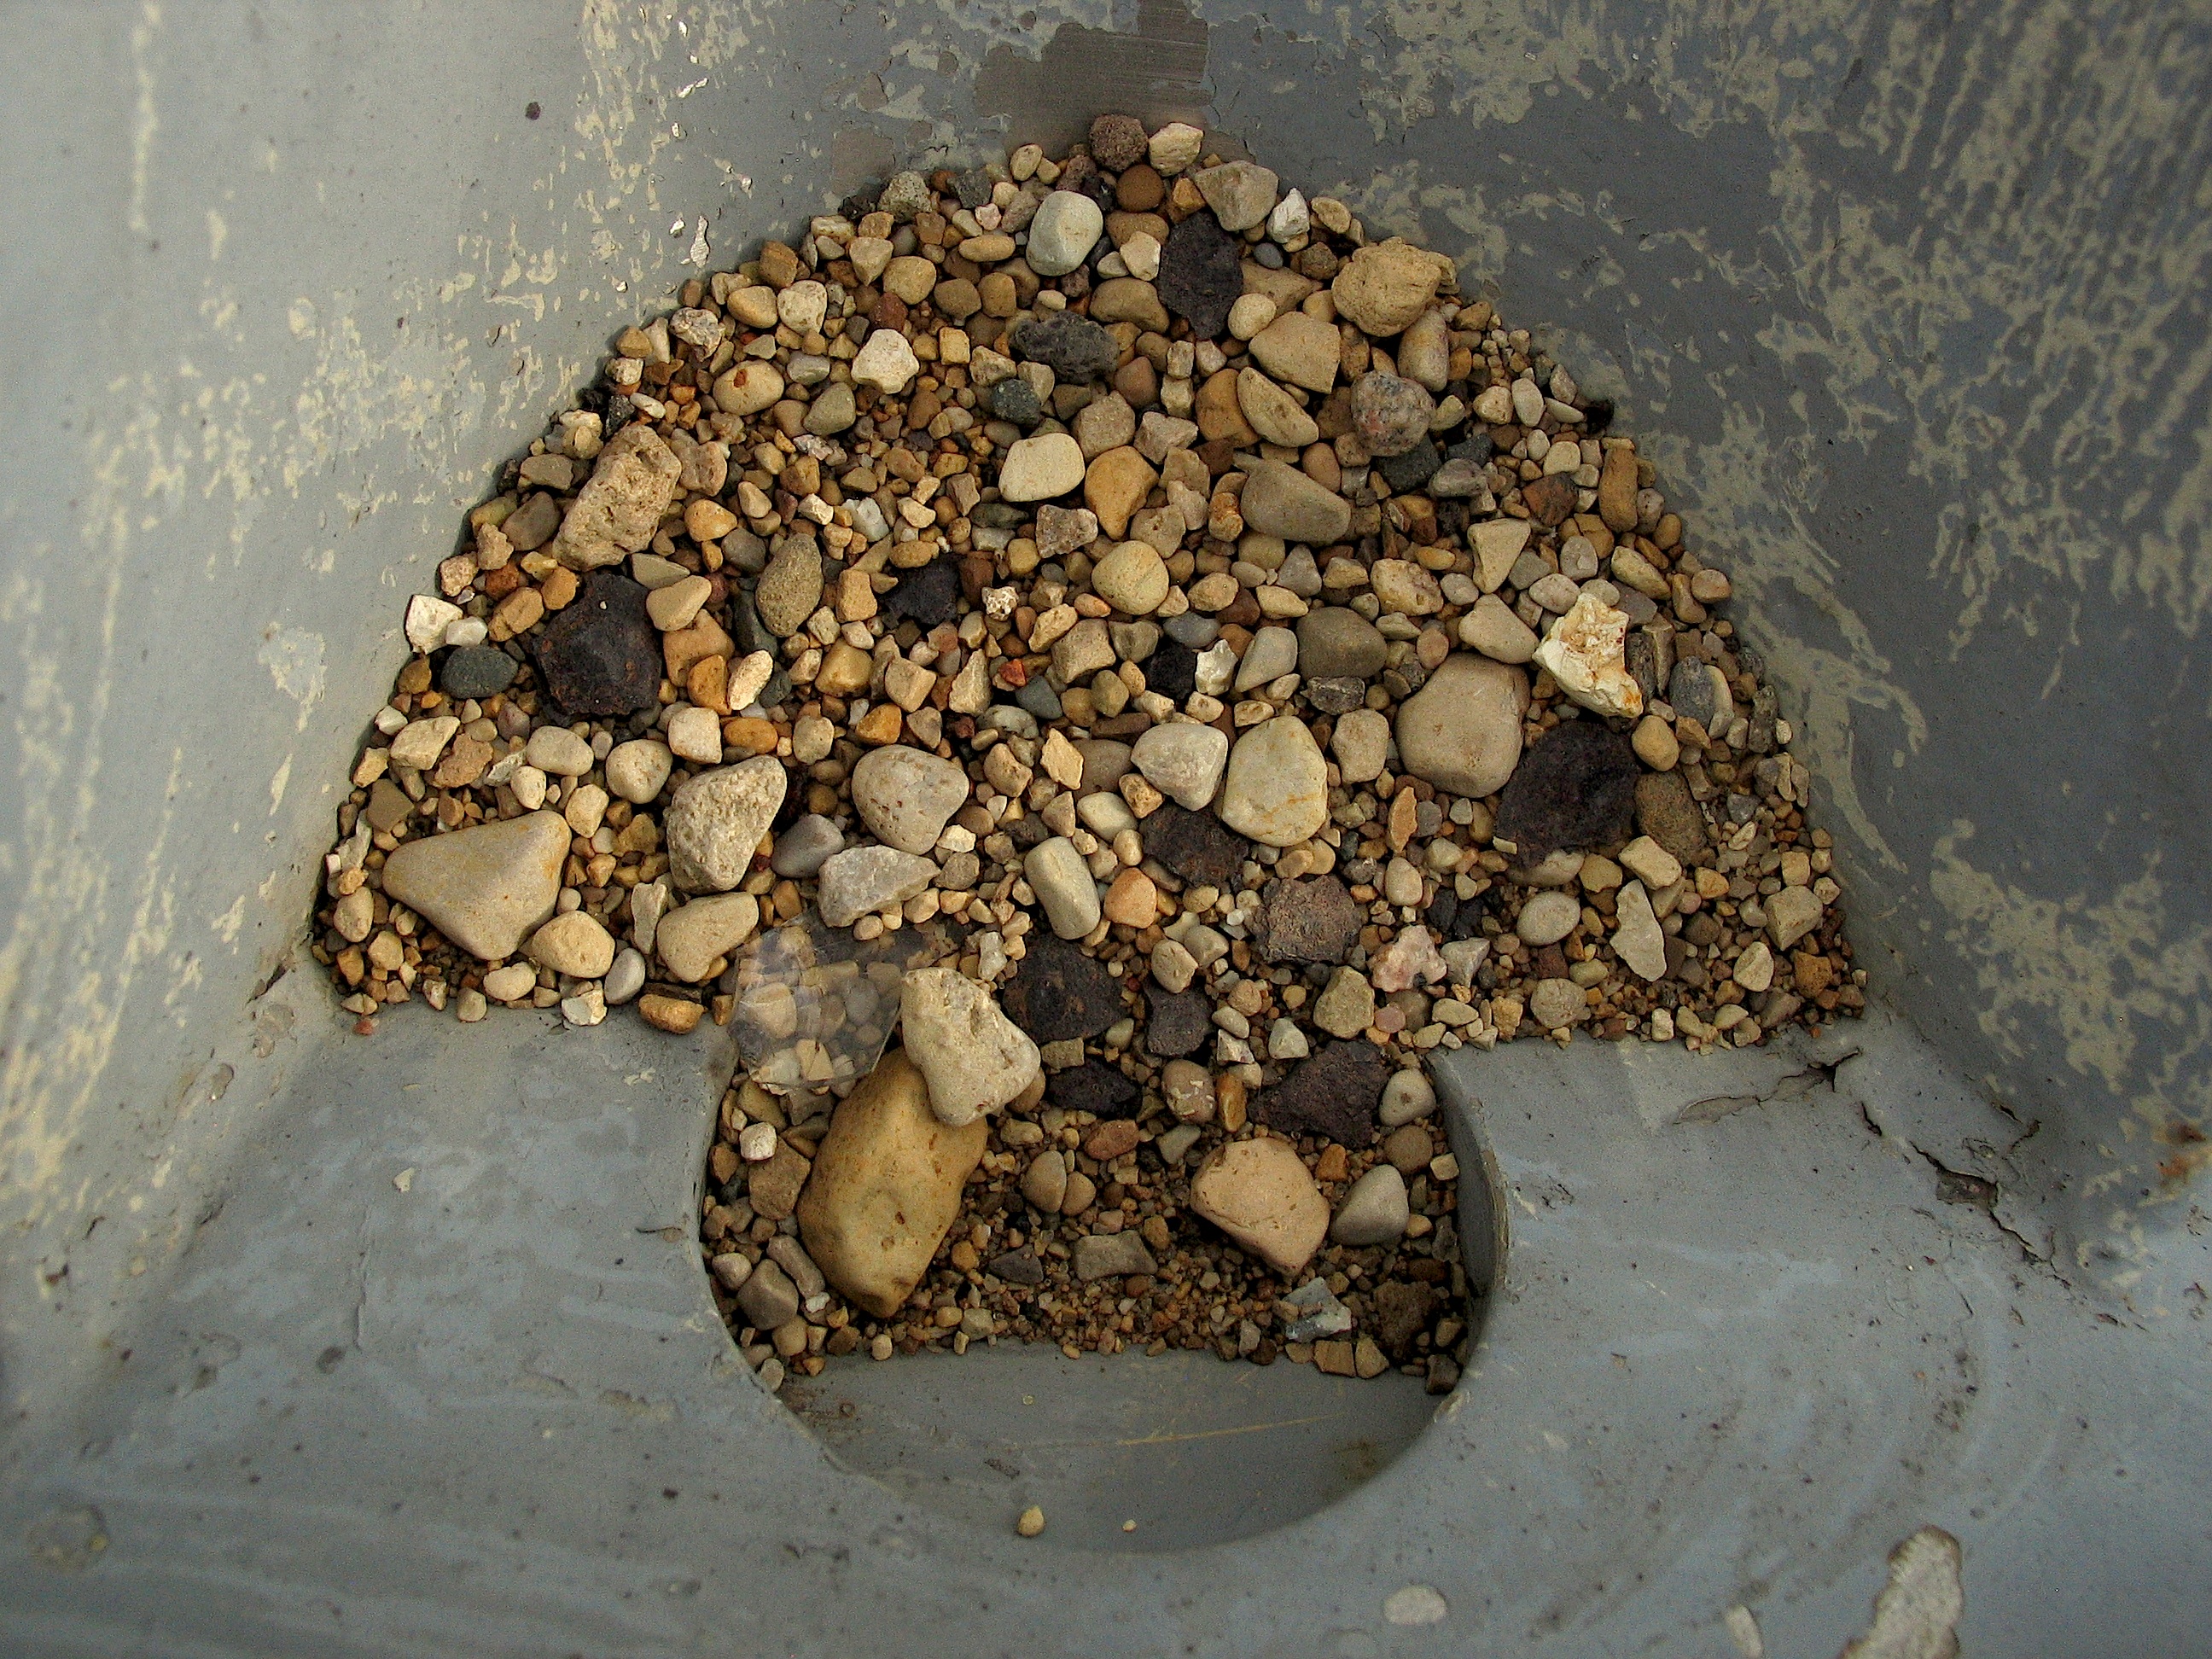 A pile of stones on concrete